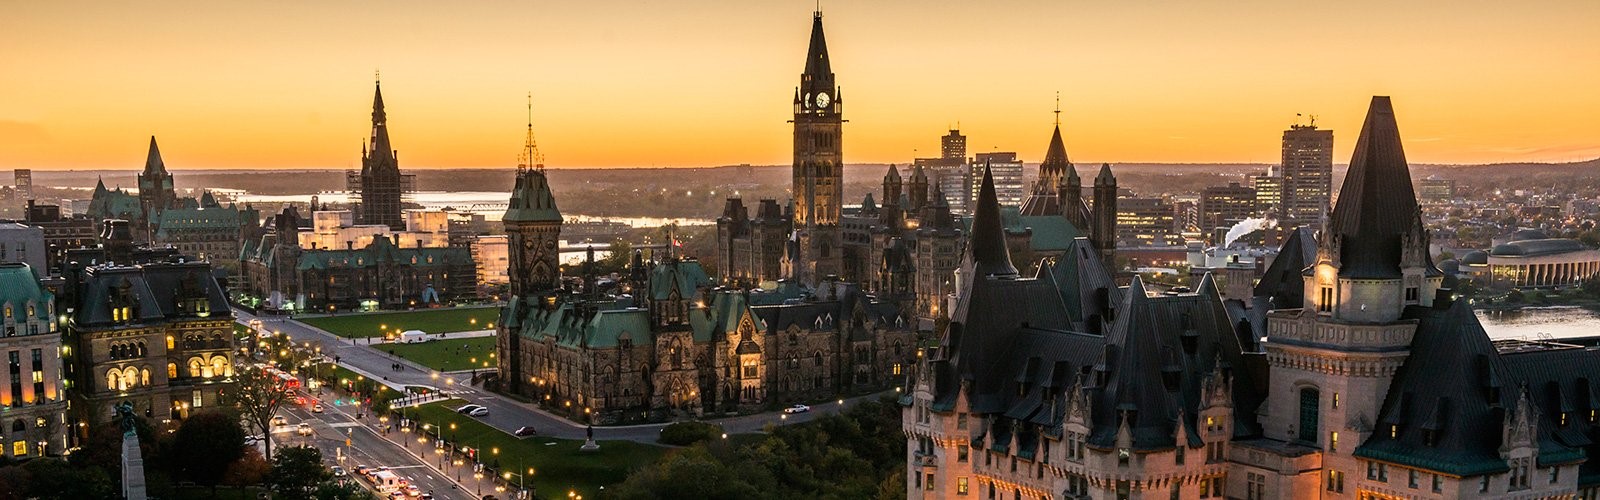 City of Ottawa landscape view of Parlement